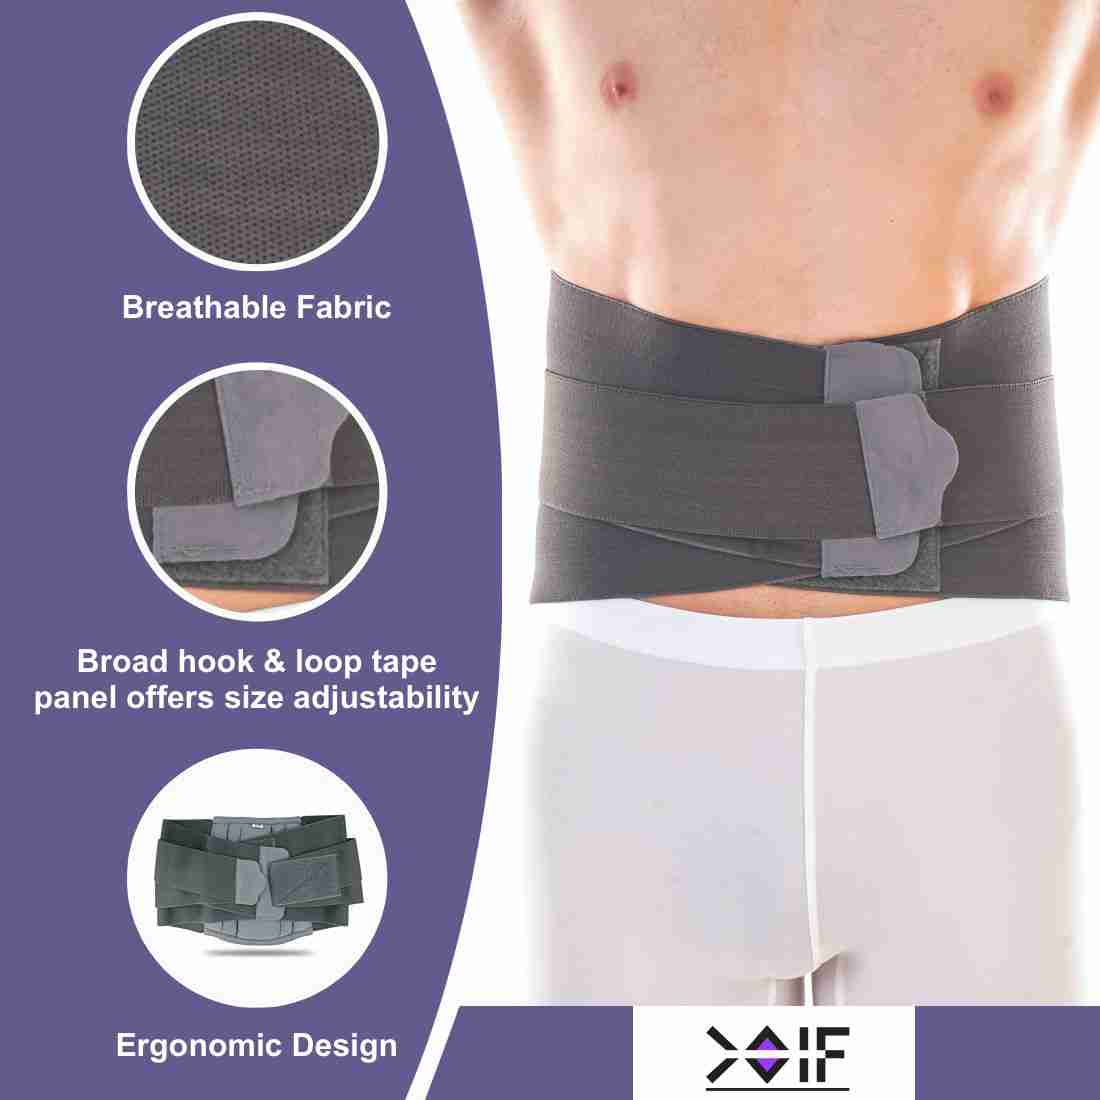 Dr Cetus Lumbar Support LS Belt for Back Pain Relief for Women and Men.  Belt With